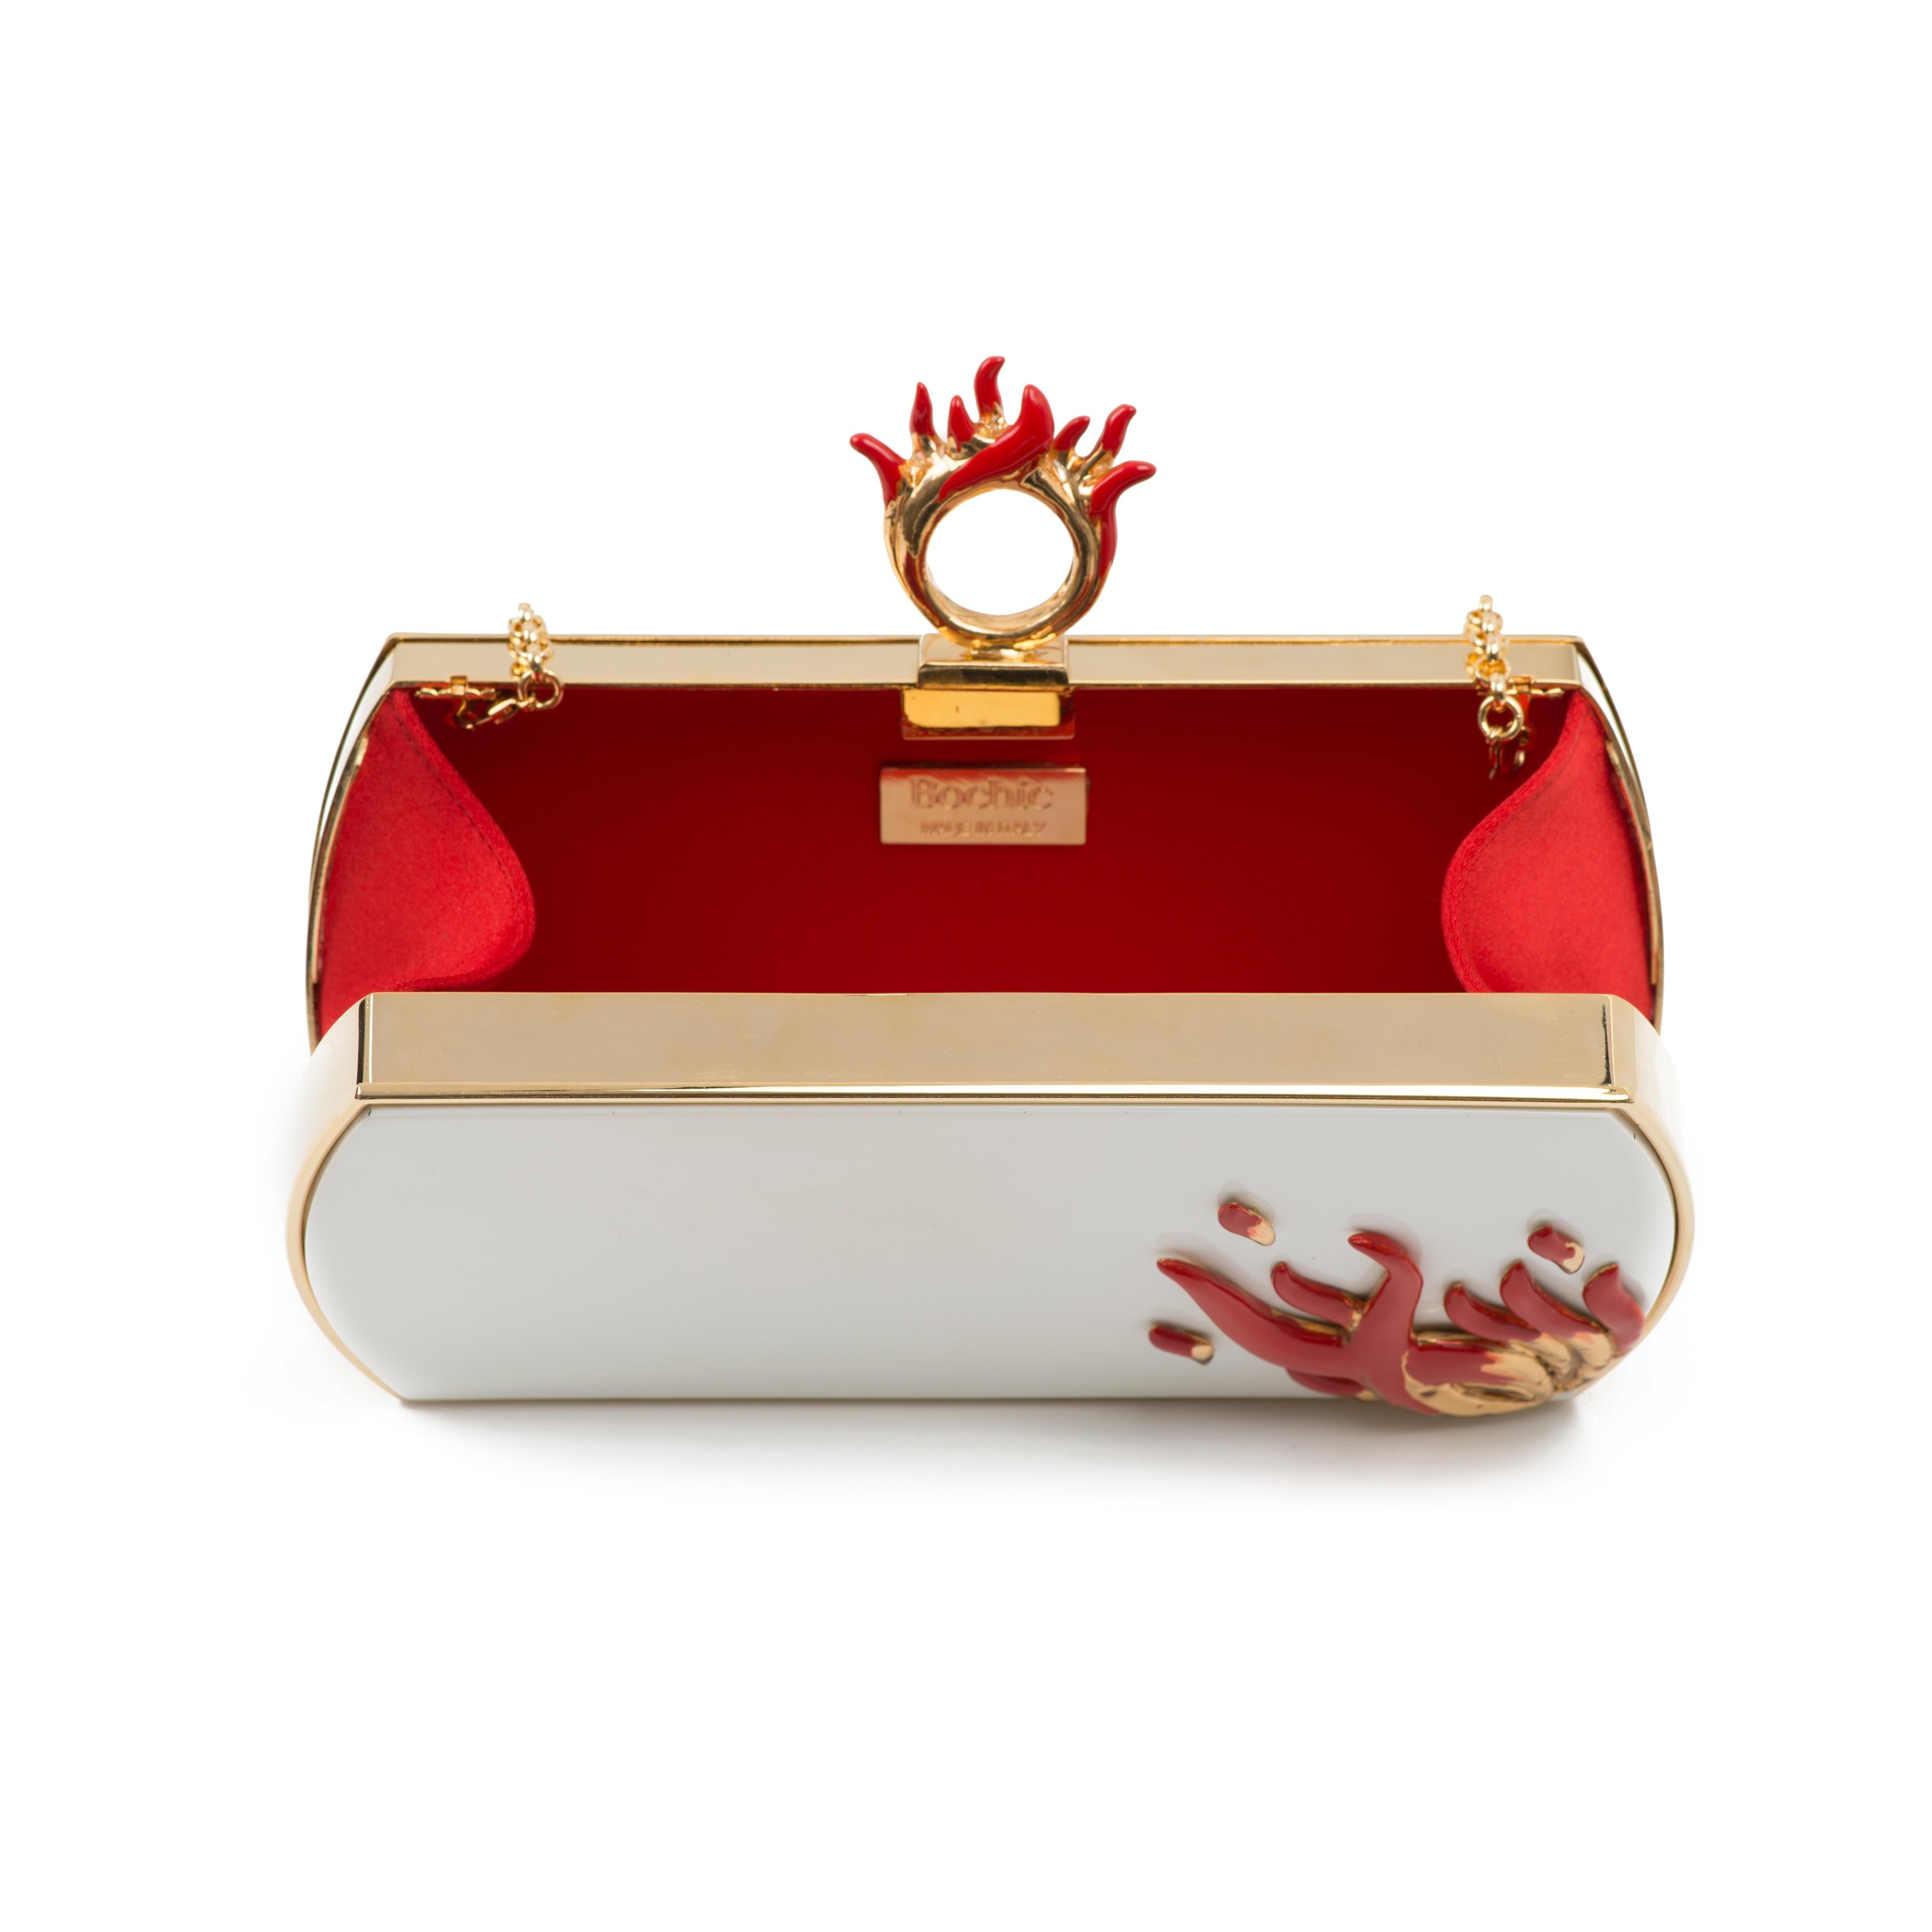 Bochic “Gilda” Collector Jeweled Limited Edition Clutch Made in Italy  In Excellent Condition For Sale In New York, NY